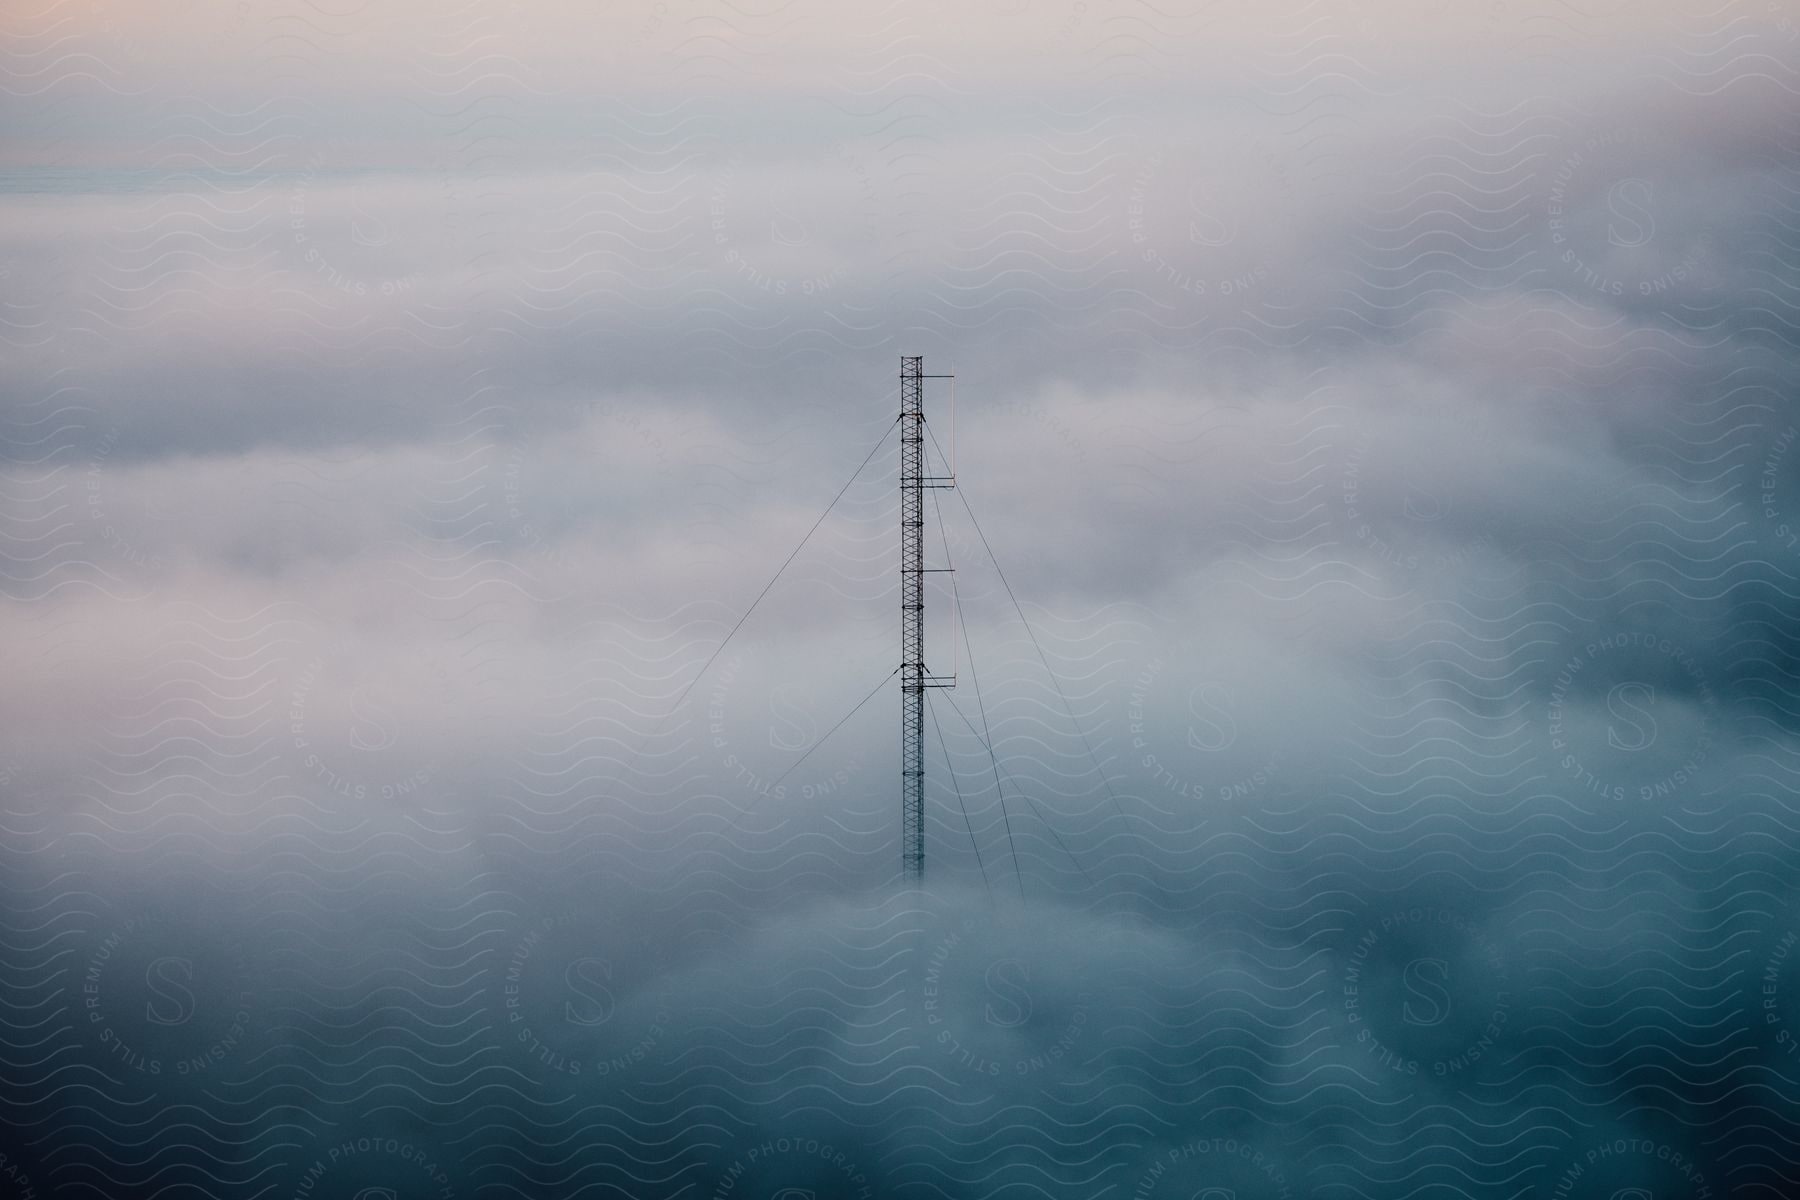 A tower with bracing cables stands high above the clouds